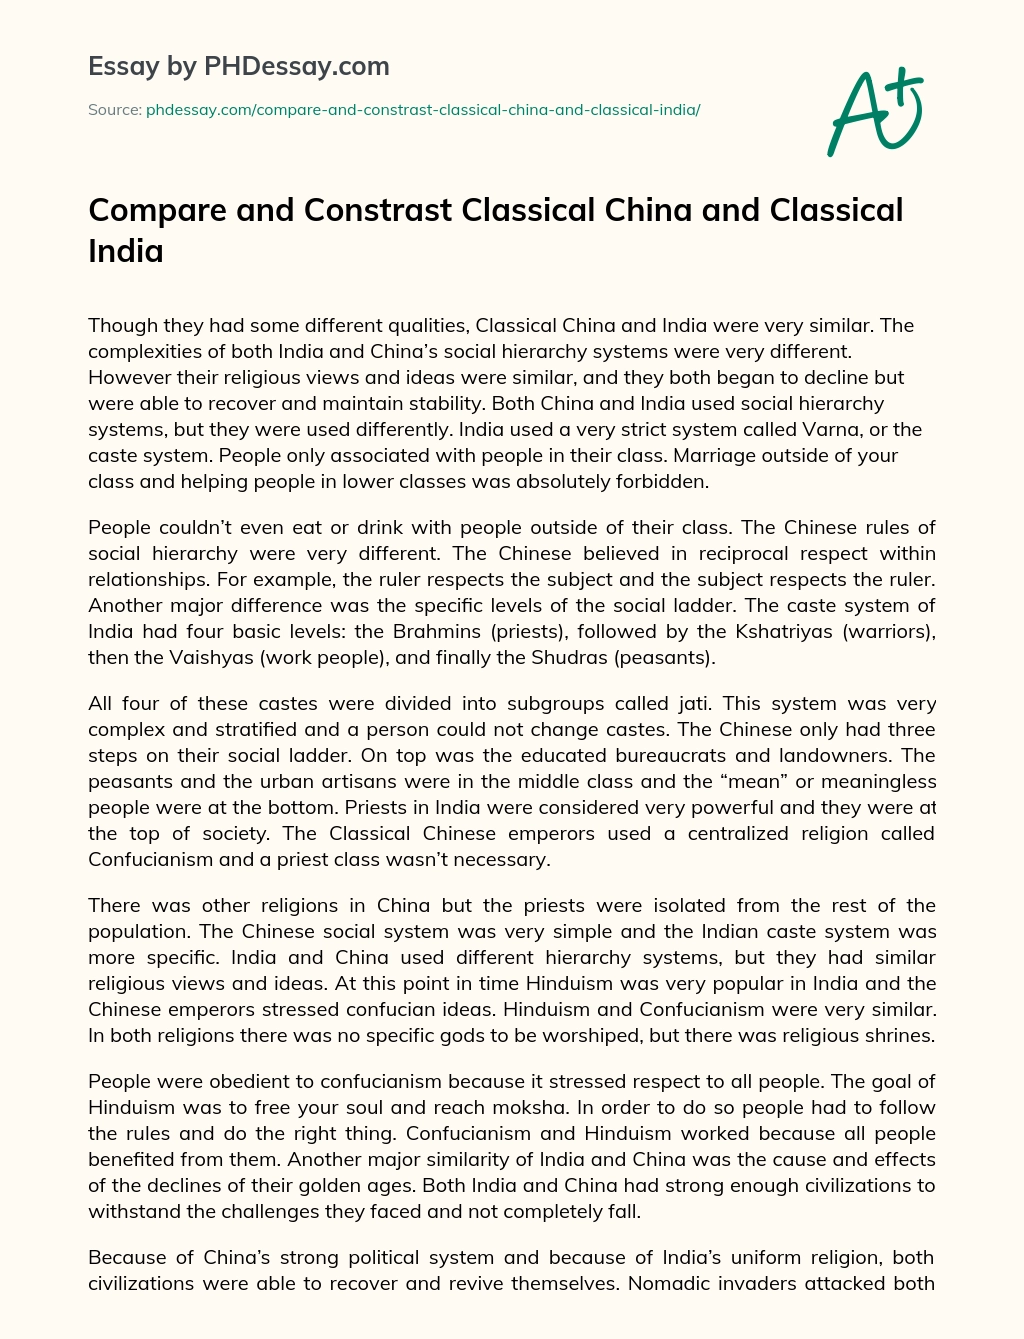 Compare and Constrast Classical China and Classical India essay